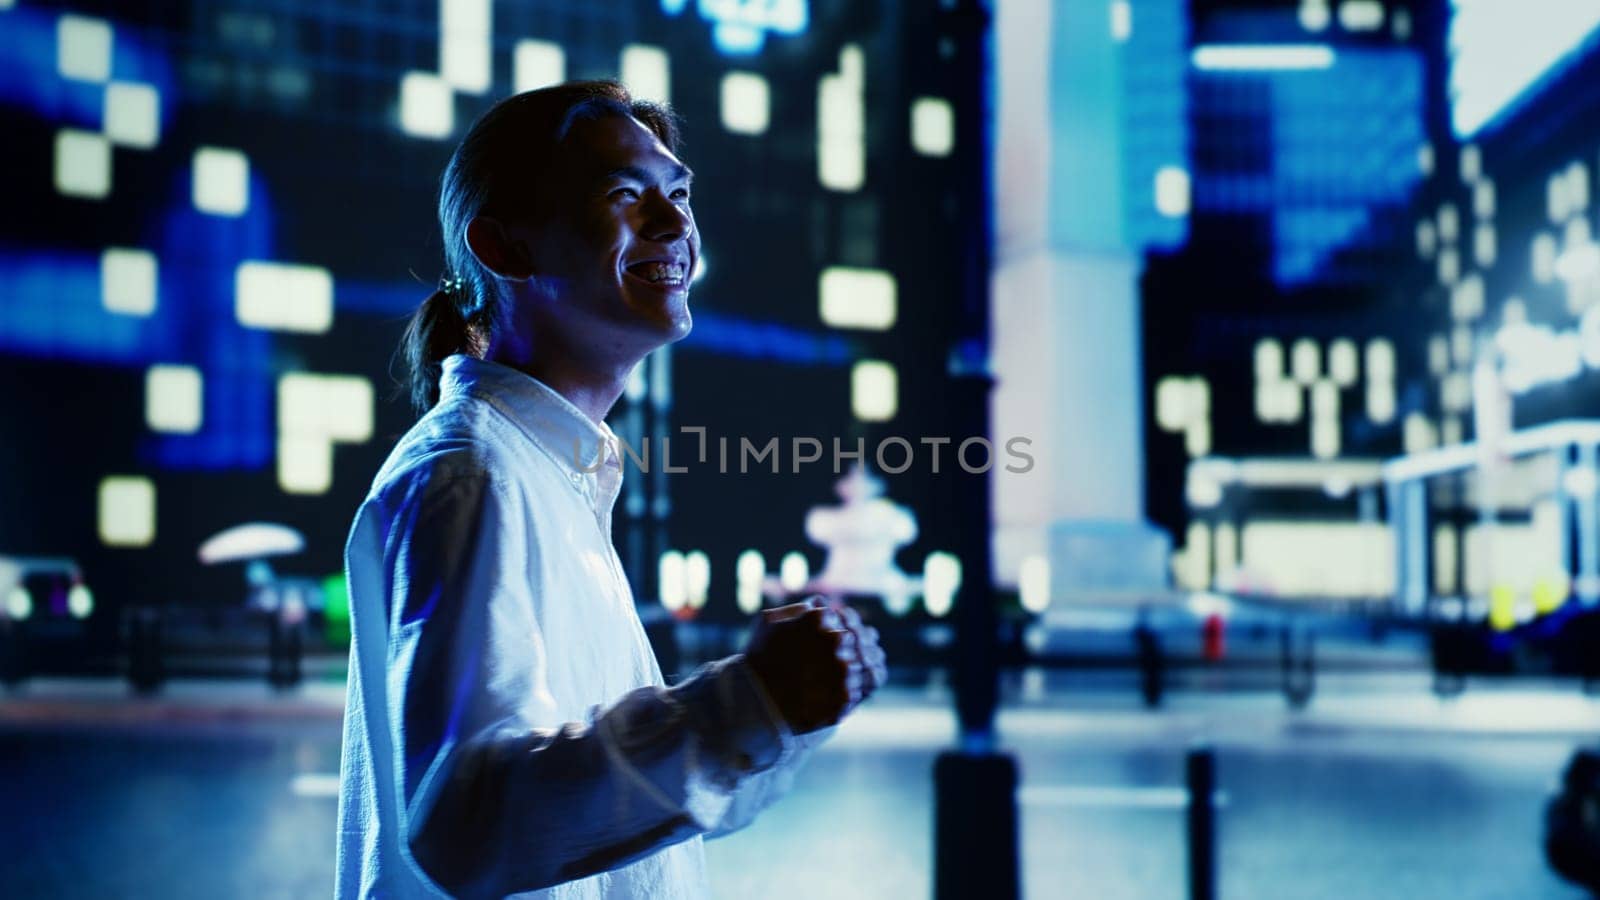 Man laughing walking in city at night by DCStudio